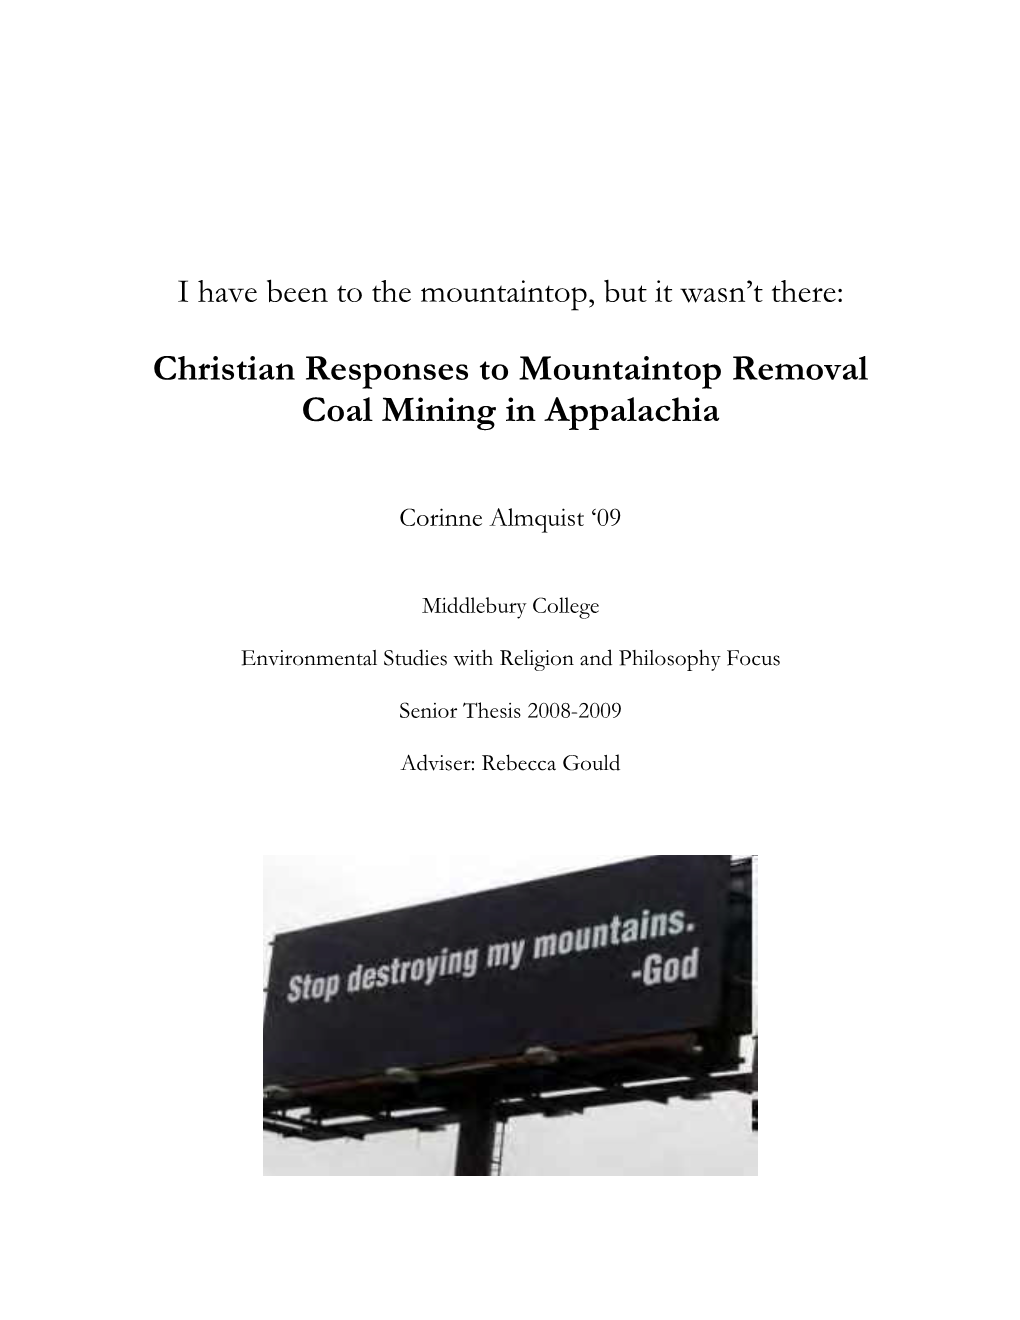 Christian Responses to Mountaintop Removal Coal Mining in Appalachia